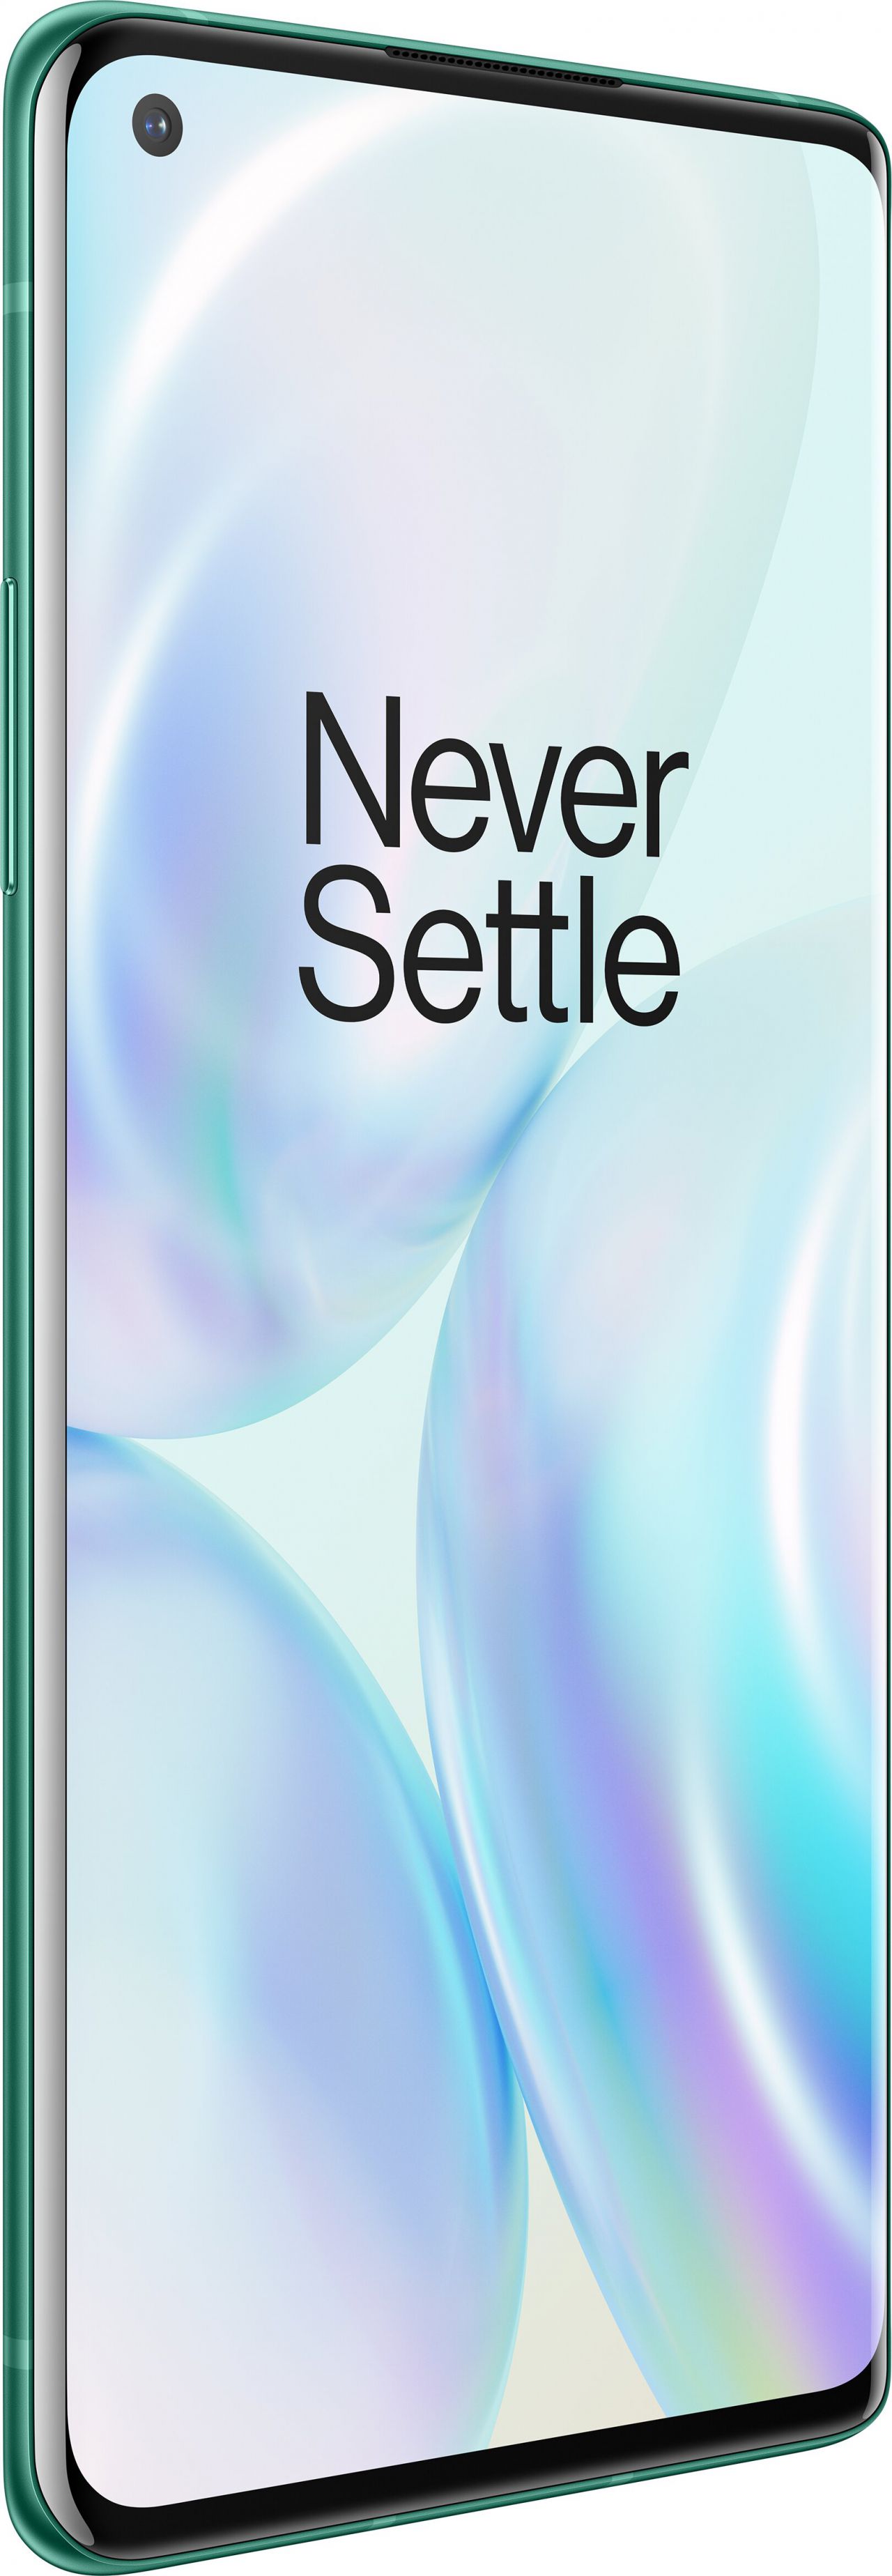 OnePlus 8 Glacial Green